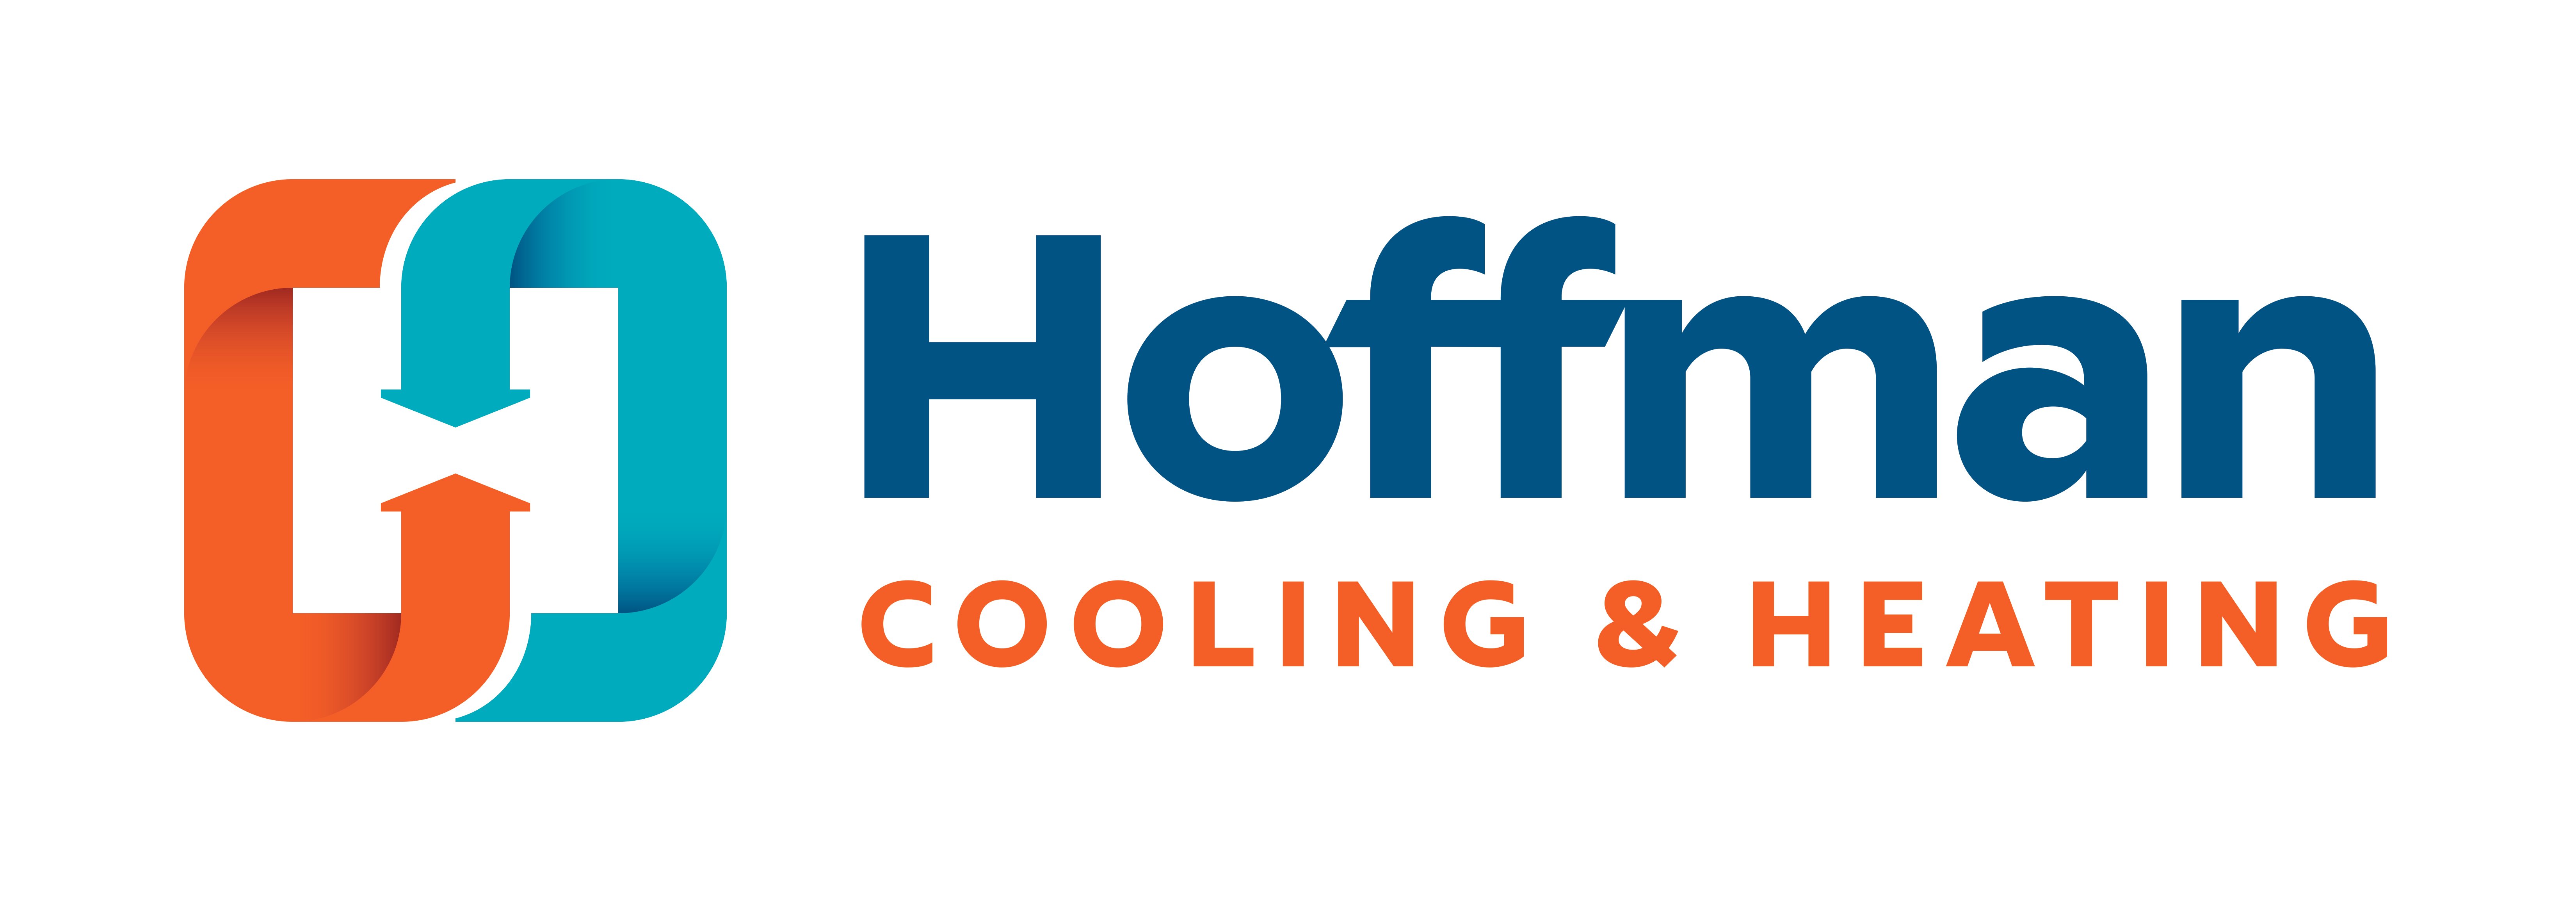 Hoffman Cooling and Heating Logo